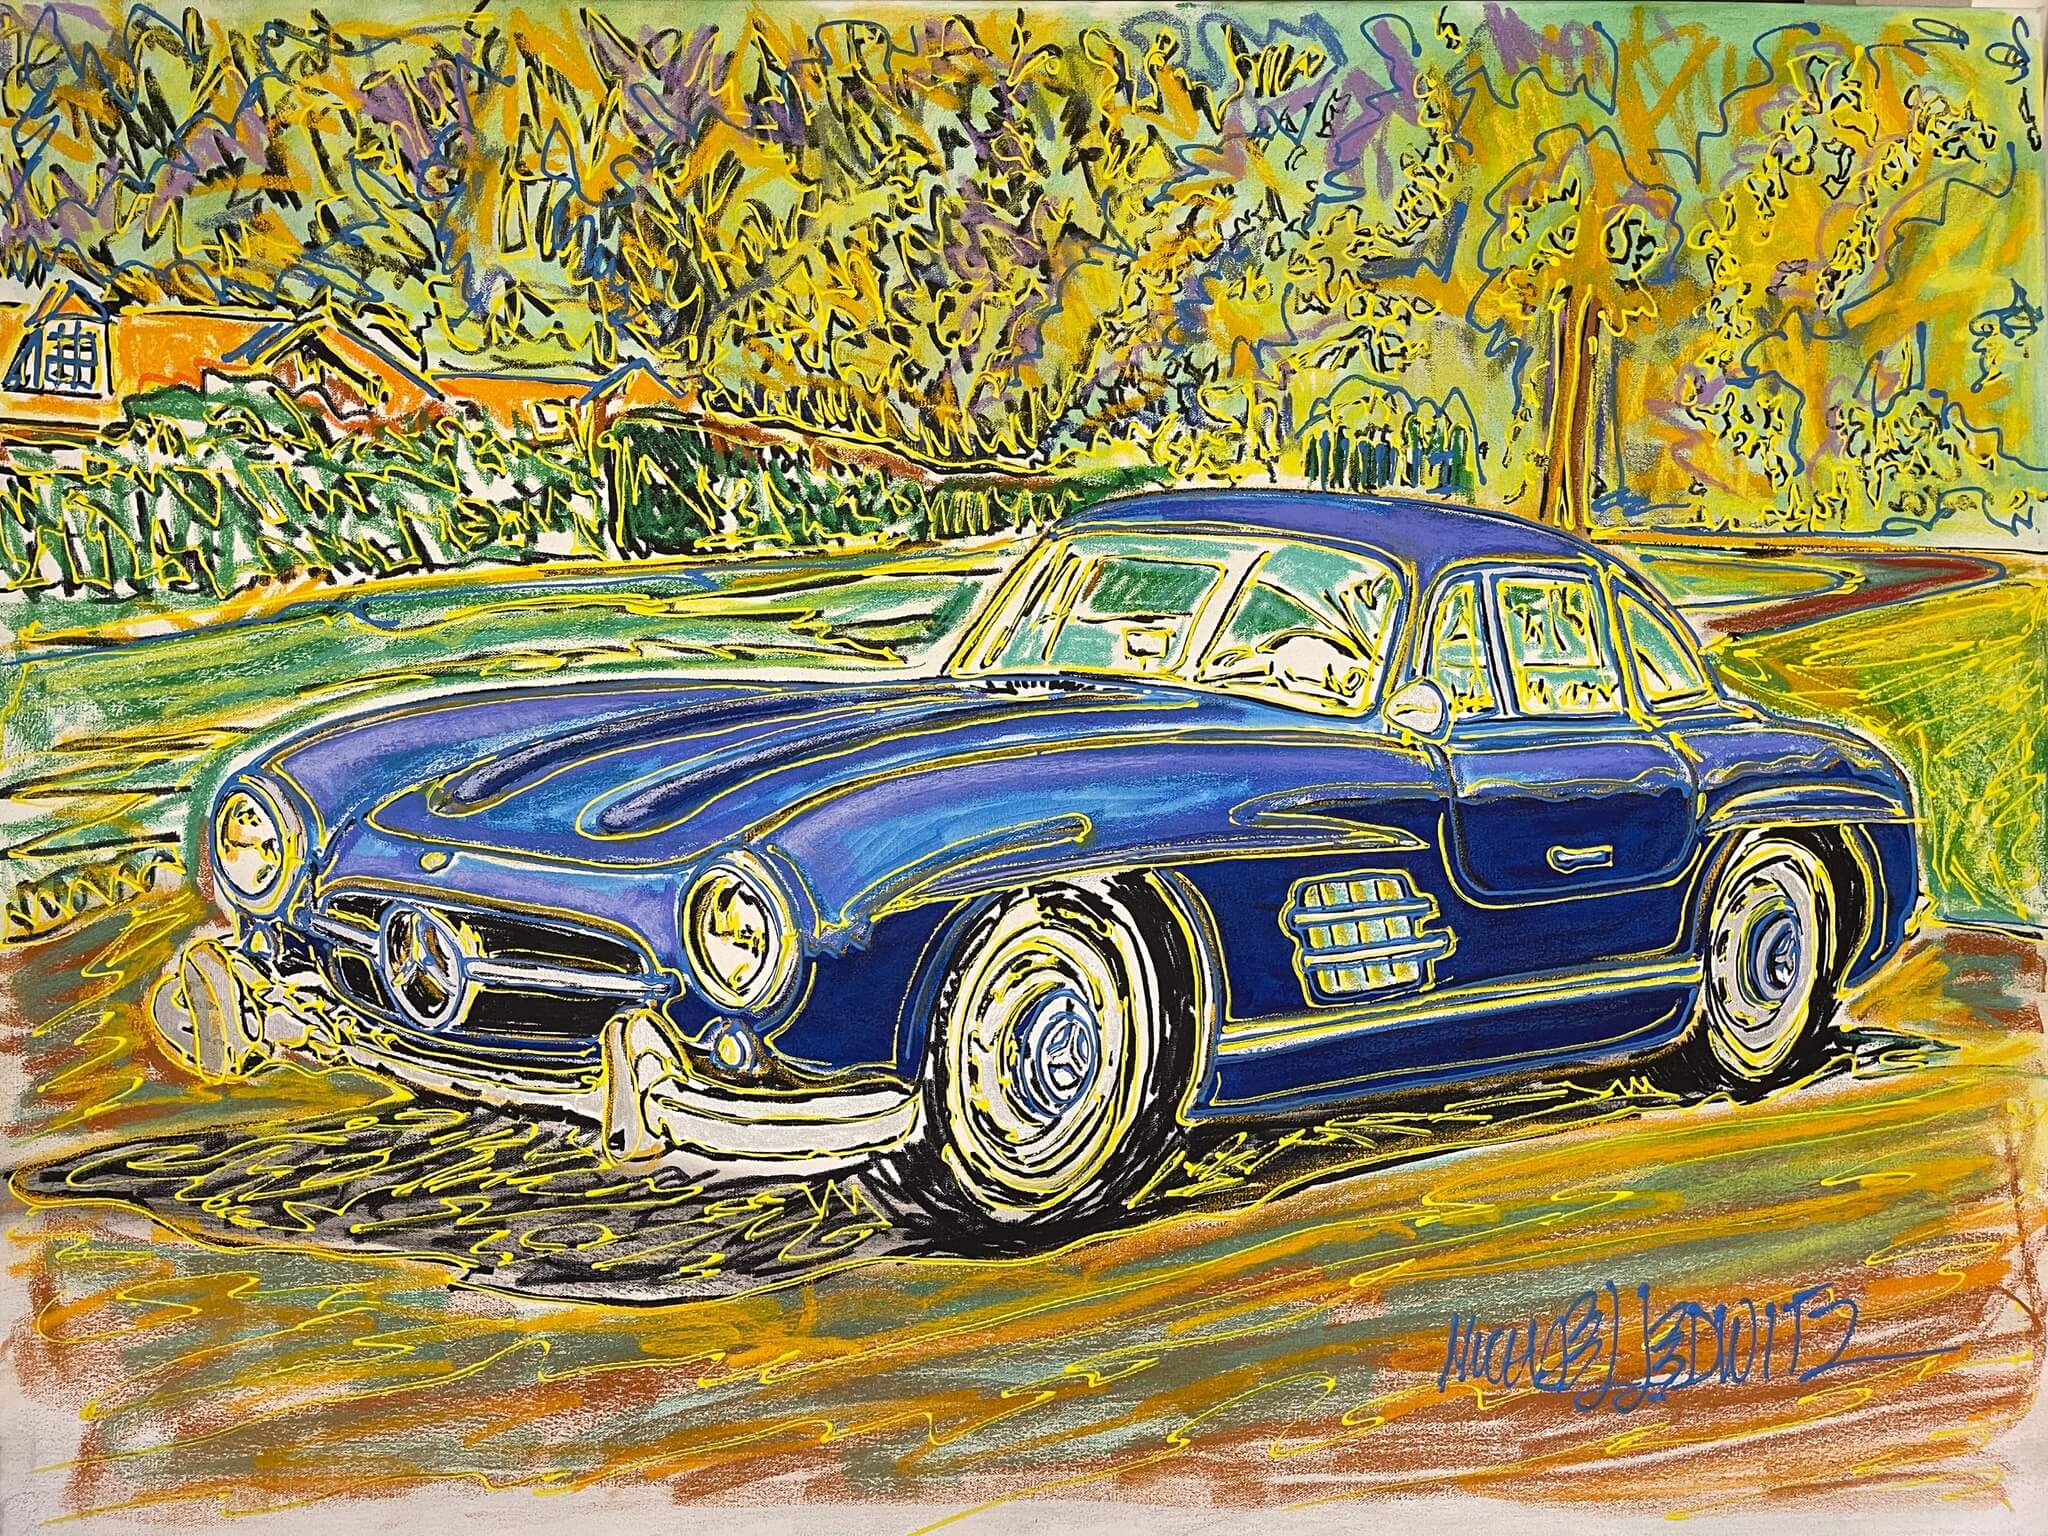 "The One and Only Gullwing" Painting by Michael Ledwitz